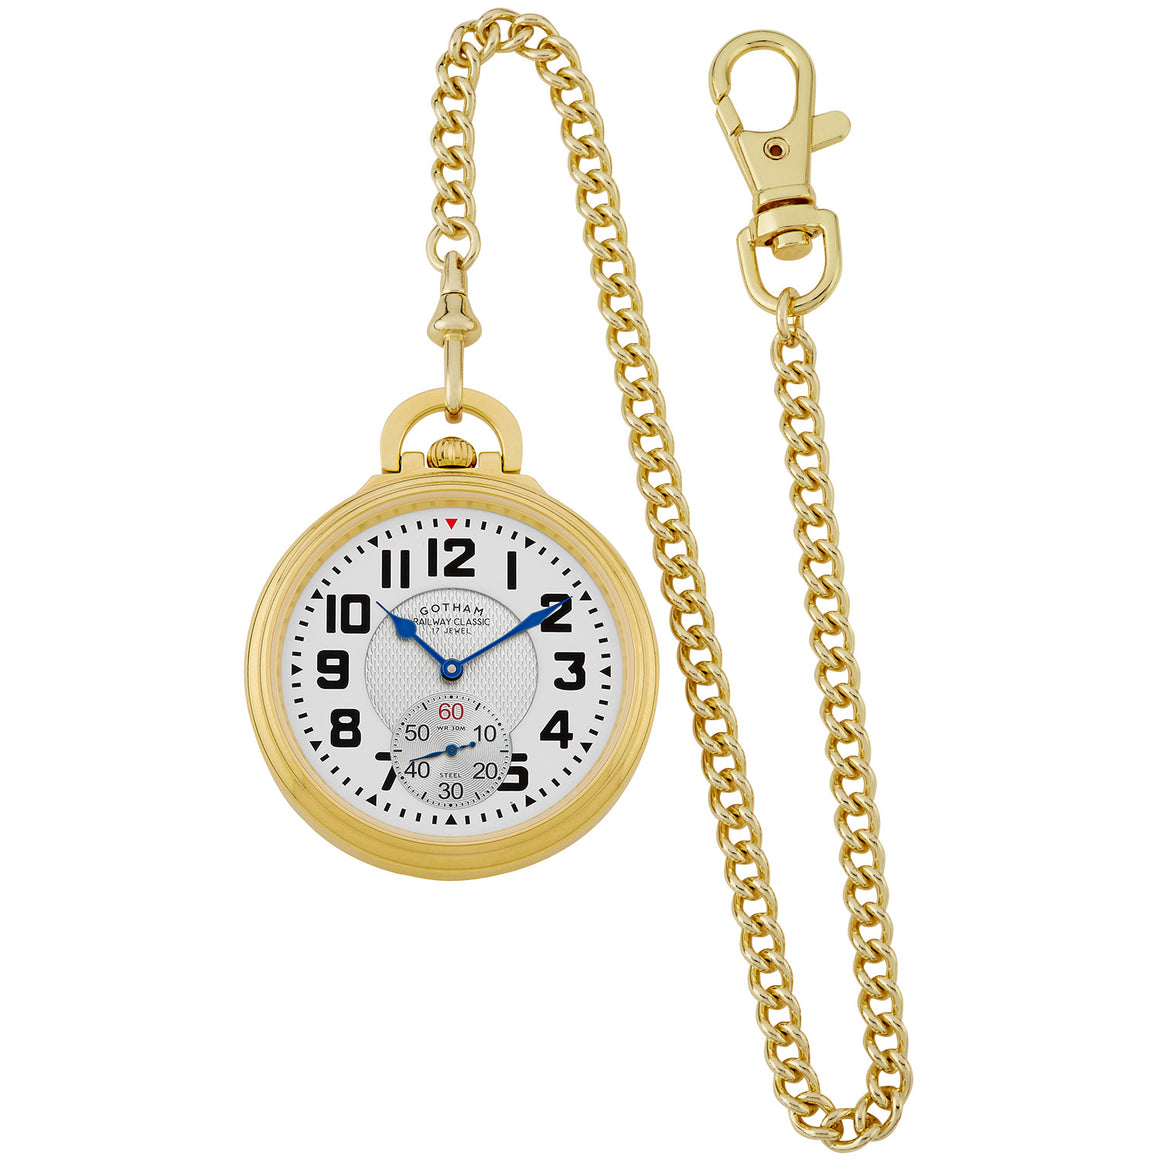 Gotham Men's Gold Plated Stainless Steel Mechanical Hand Wind Railway Classic Nostalgia Series Pocket Watch # GWC14115G